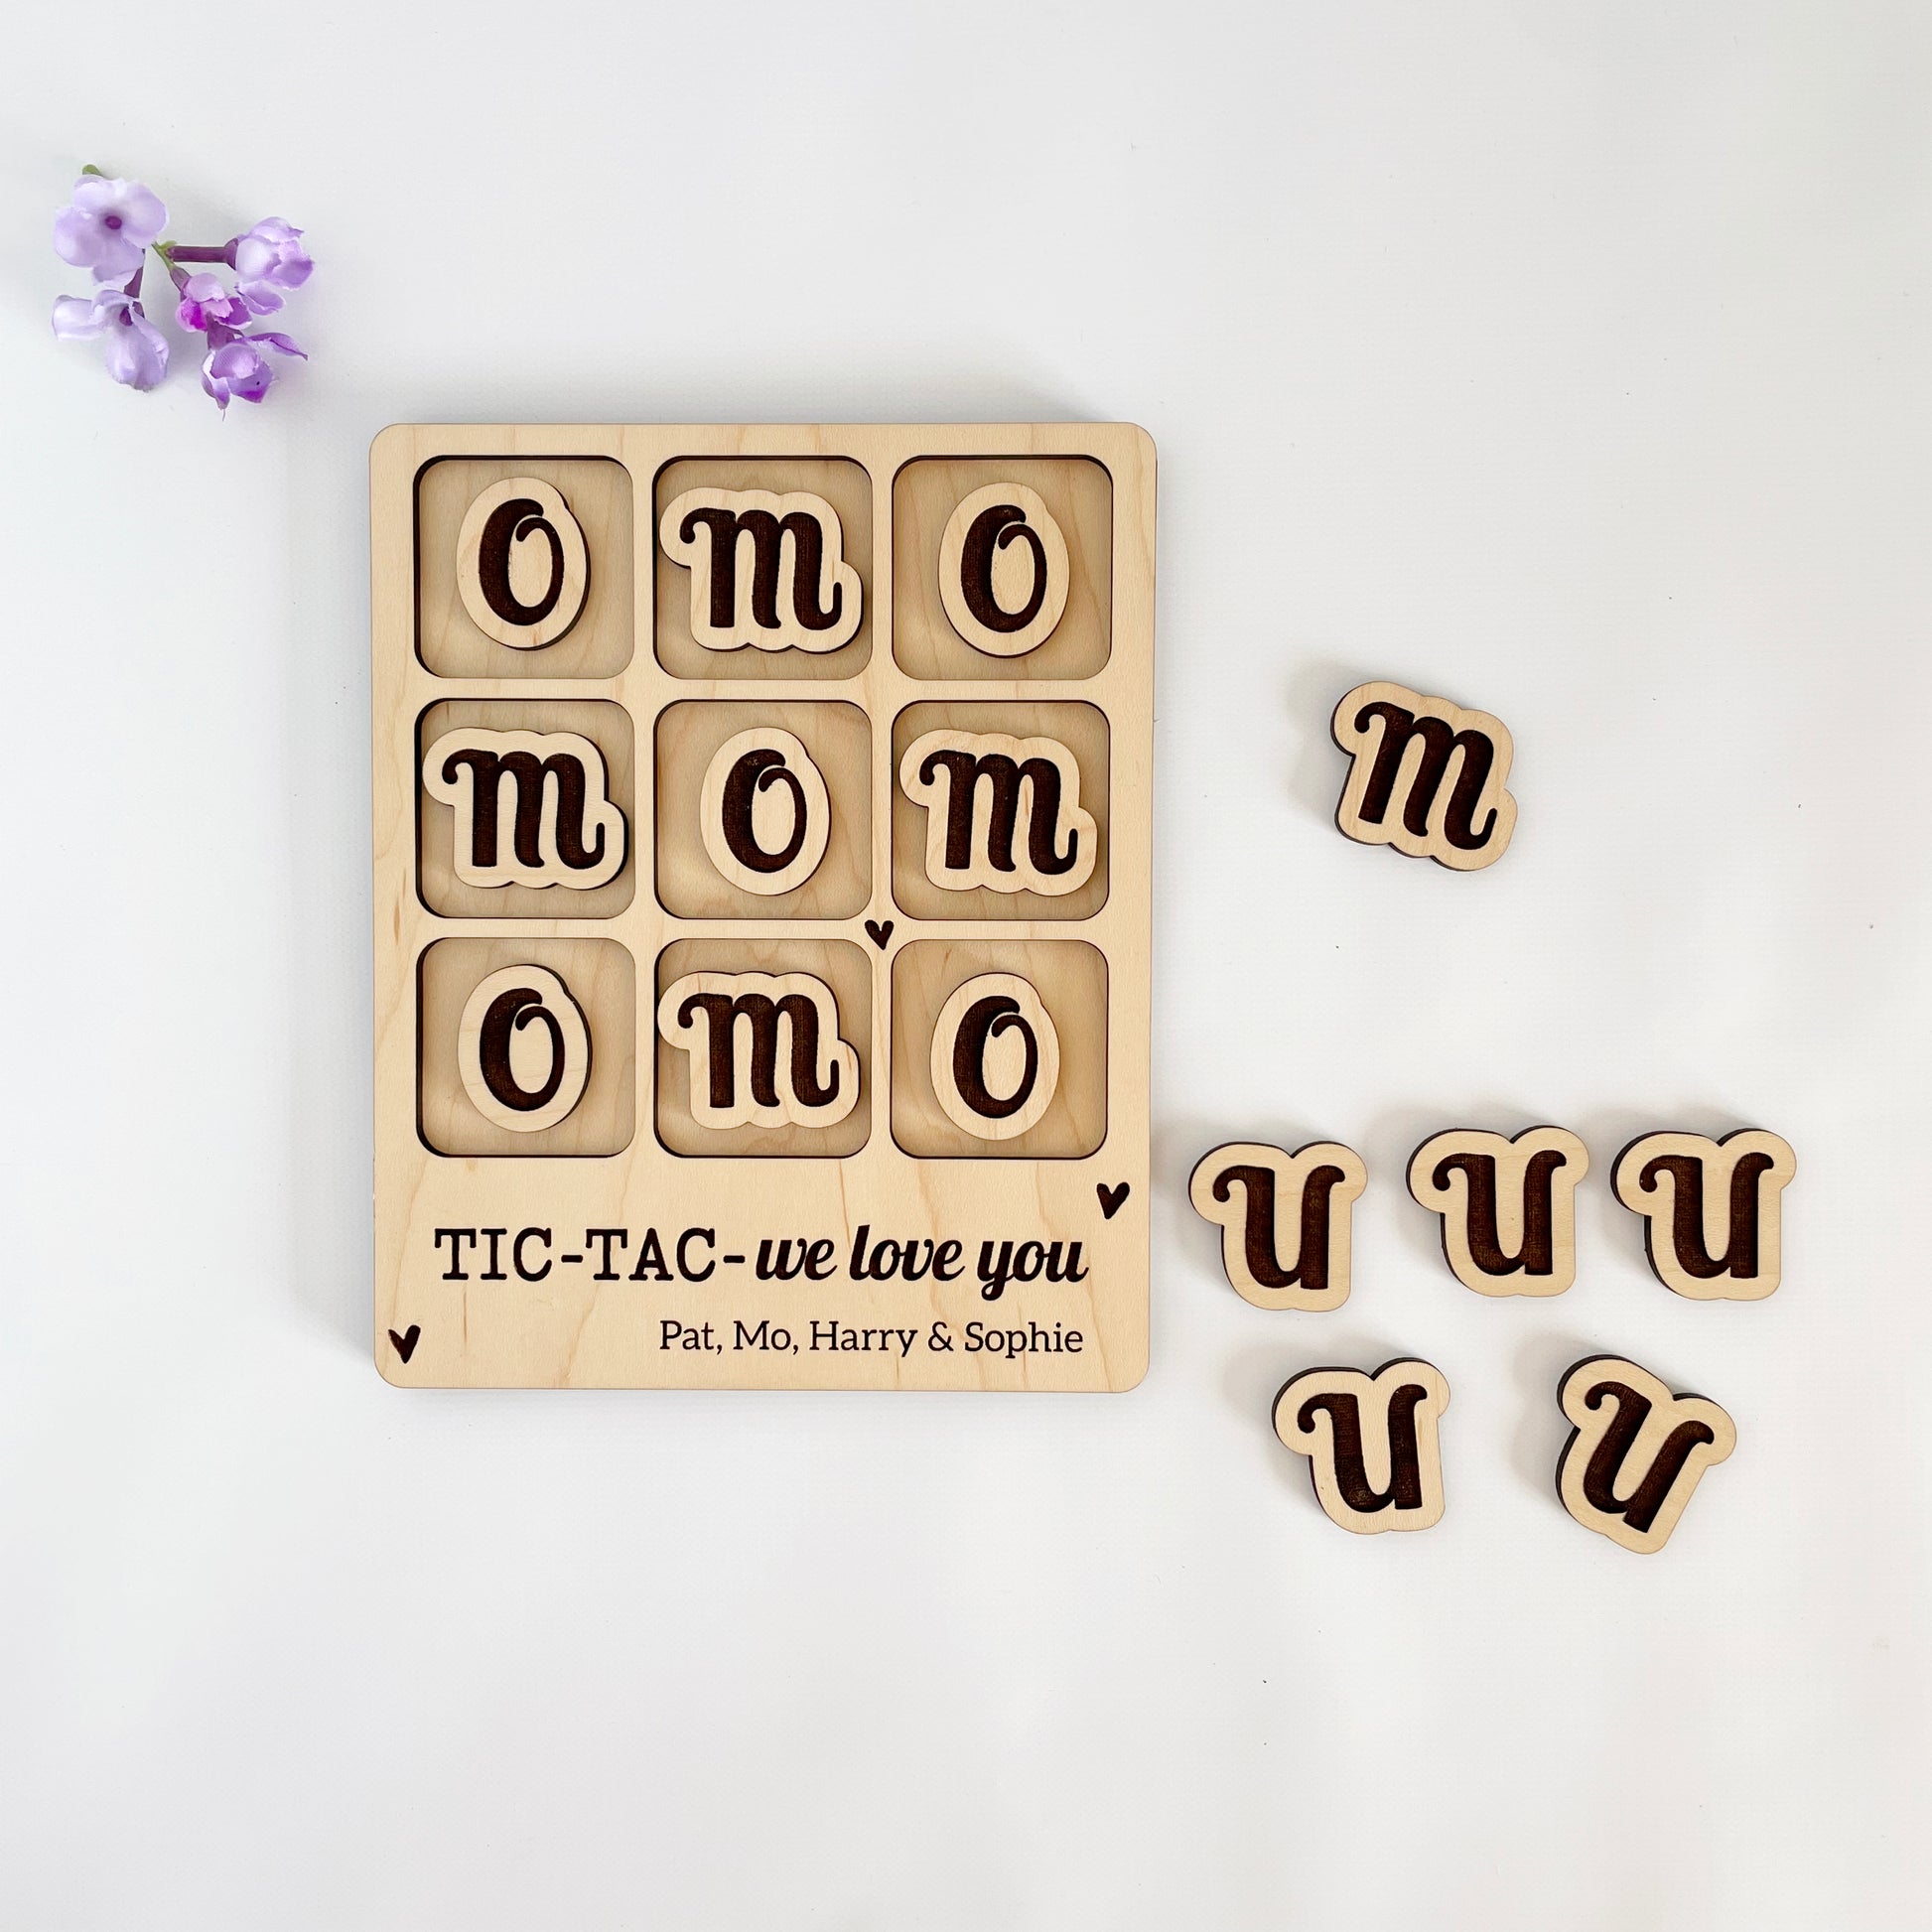 Laser cut We love you Mom, Mum, Tic Tac Toe for Moms and Mums from children